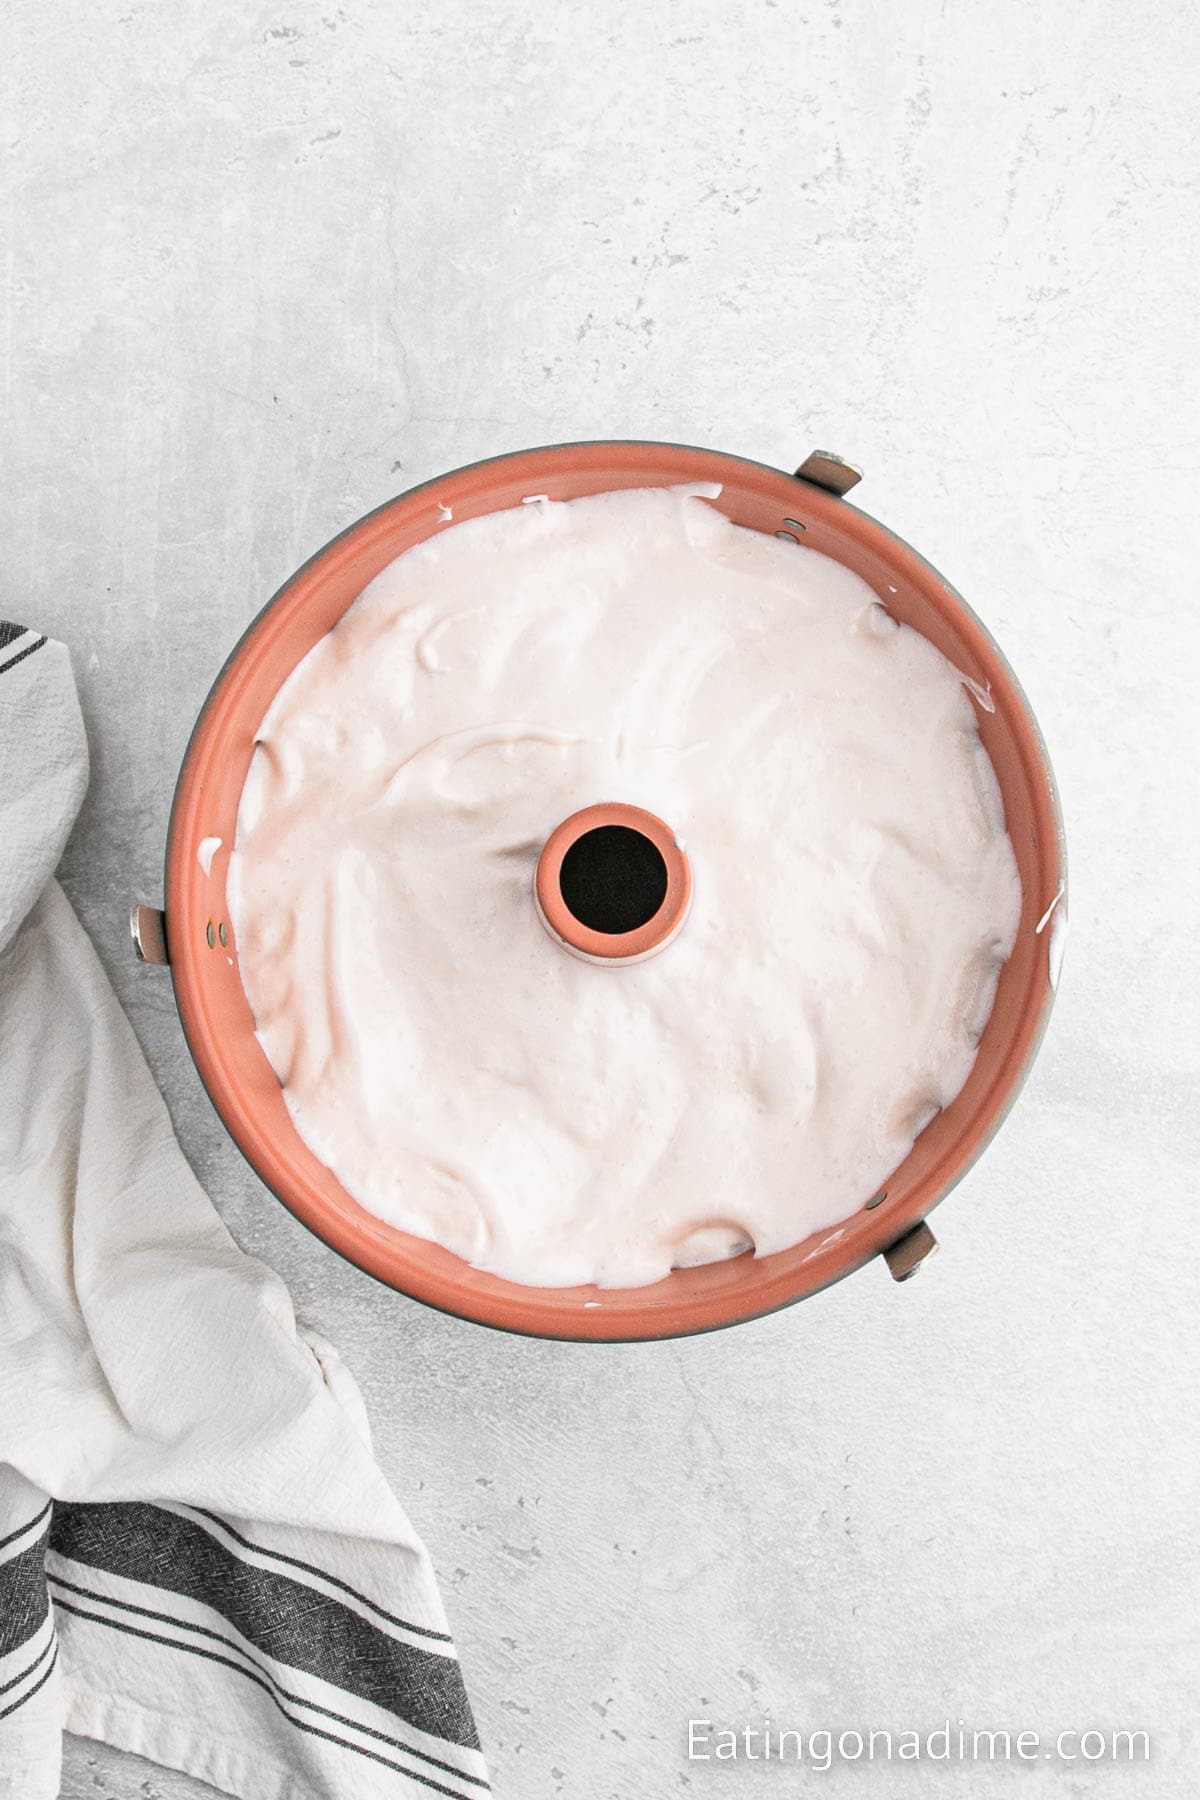 Pour the angel food cake batter into tub pan